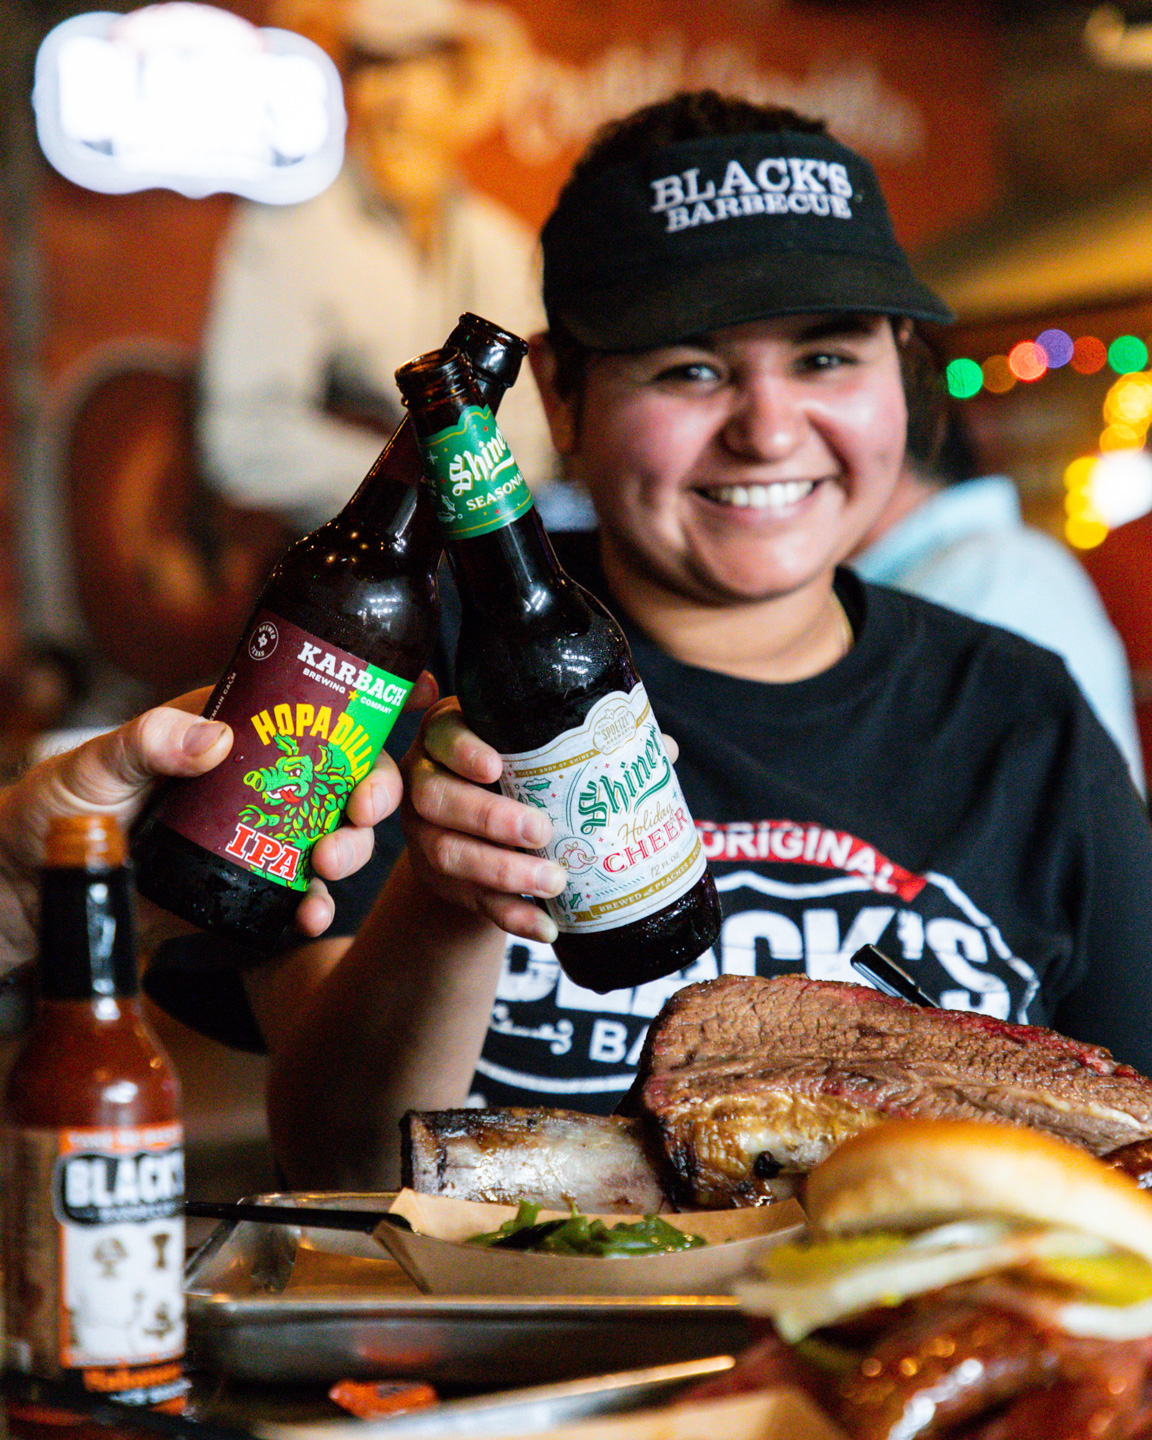 Black's BBQ Employee celebrating with a beer & brisket